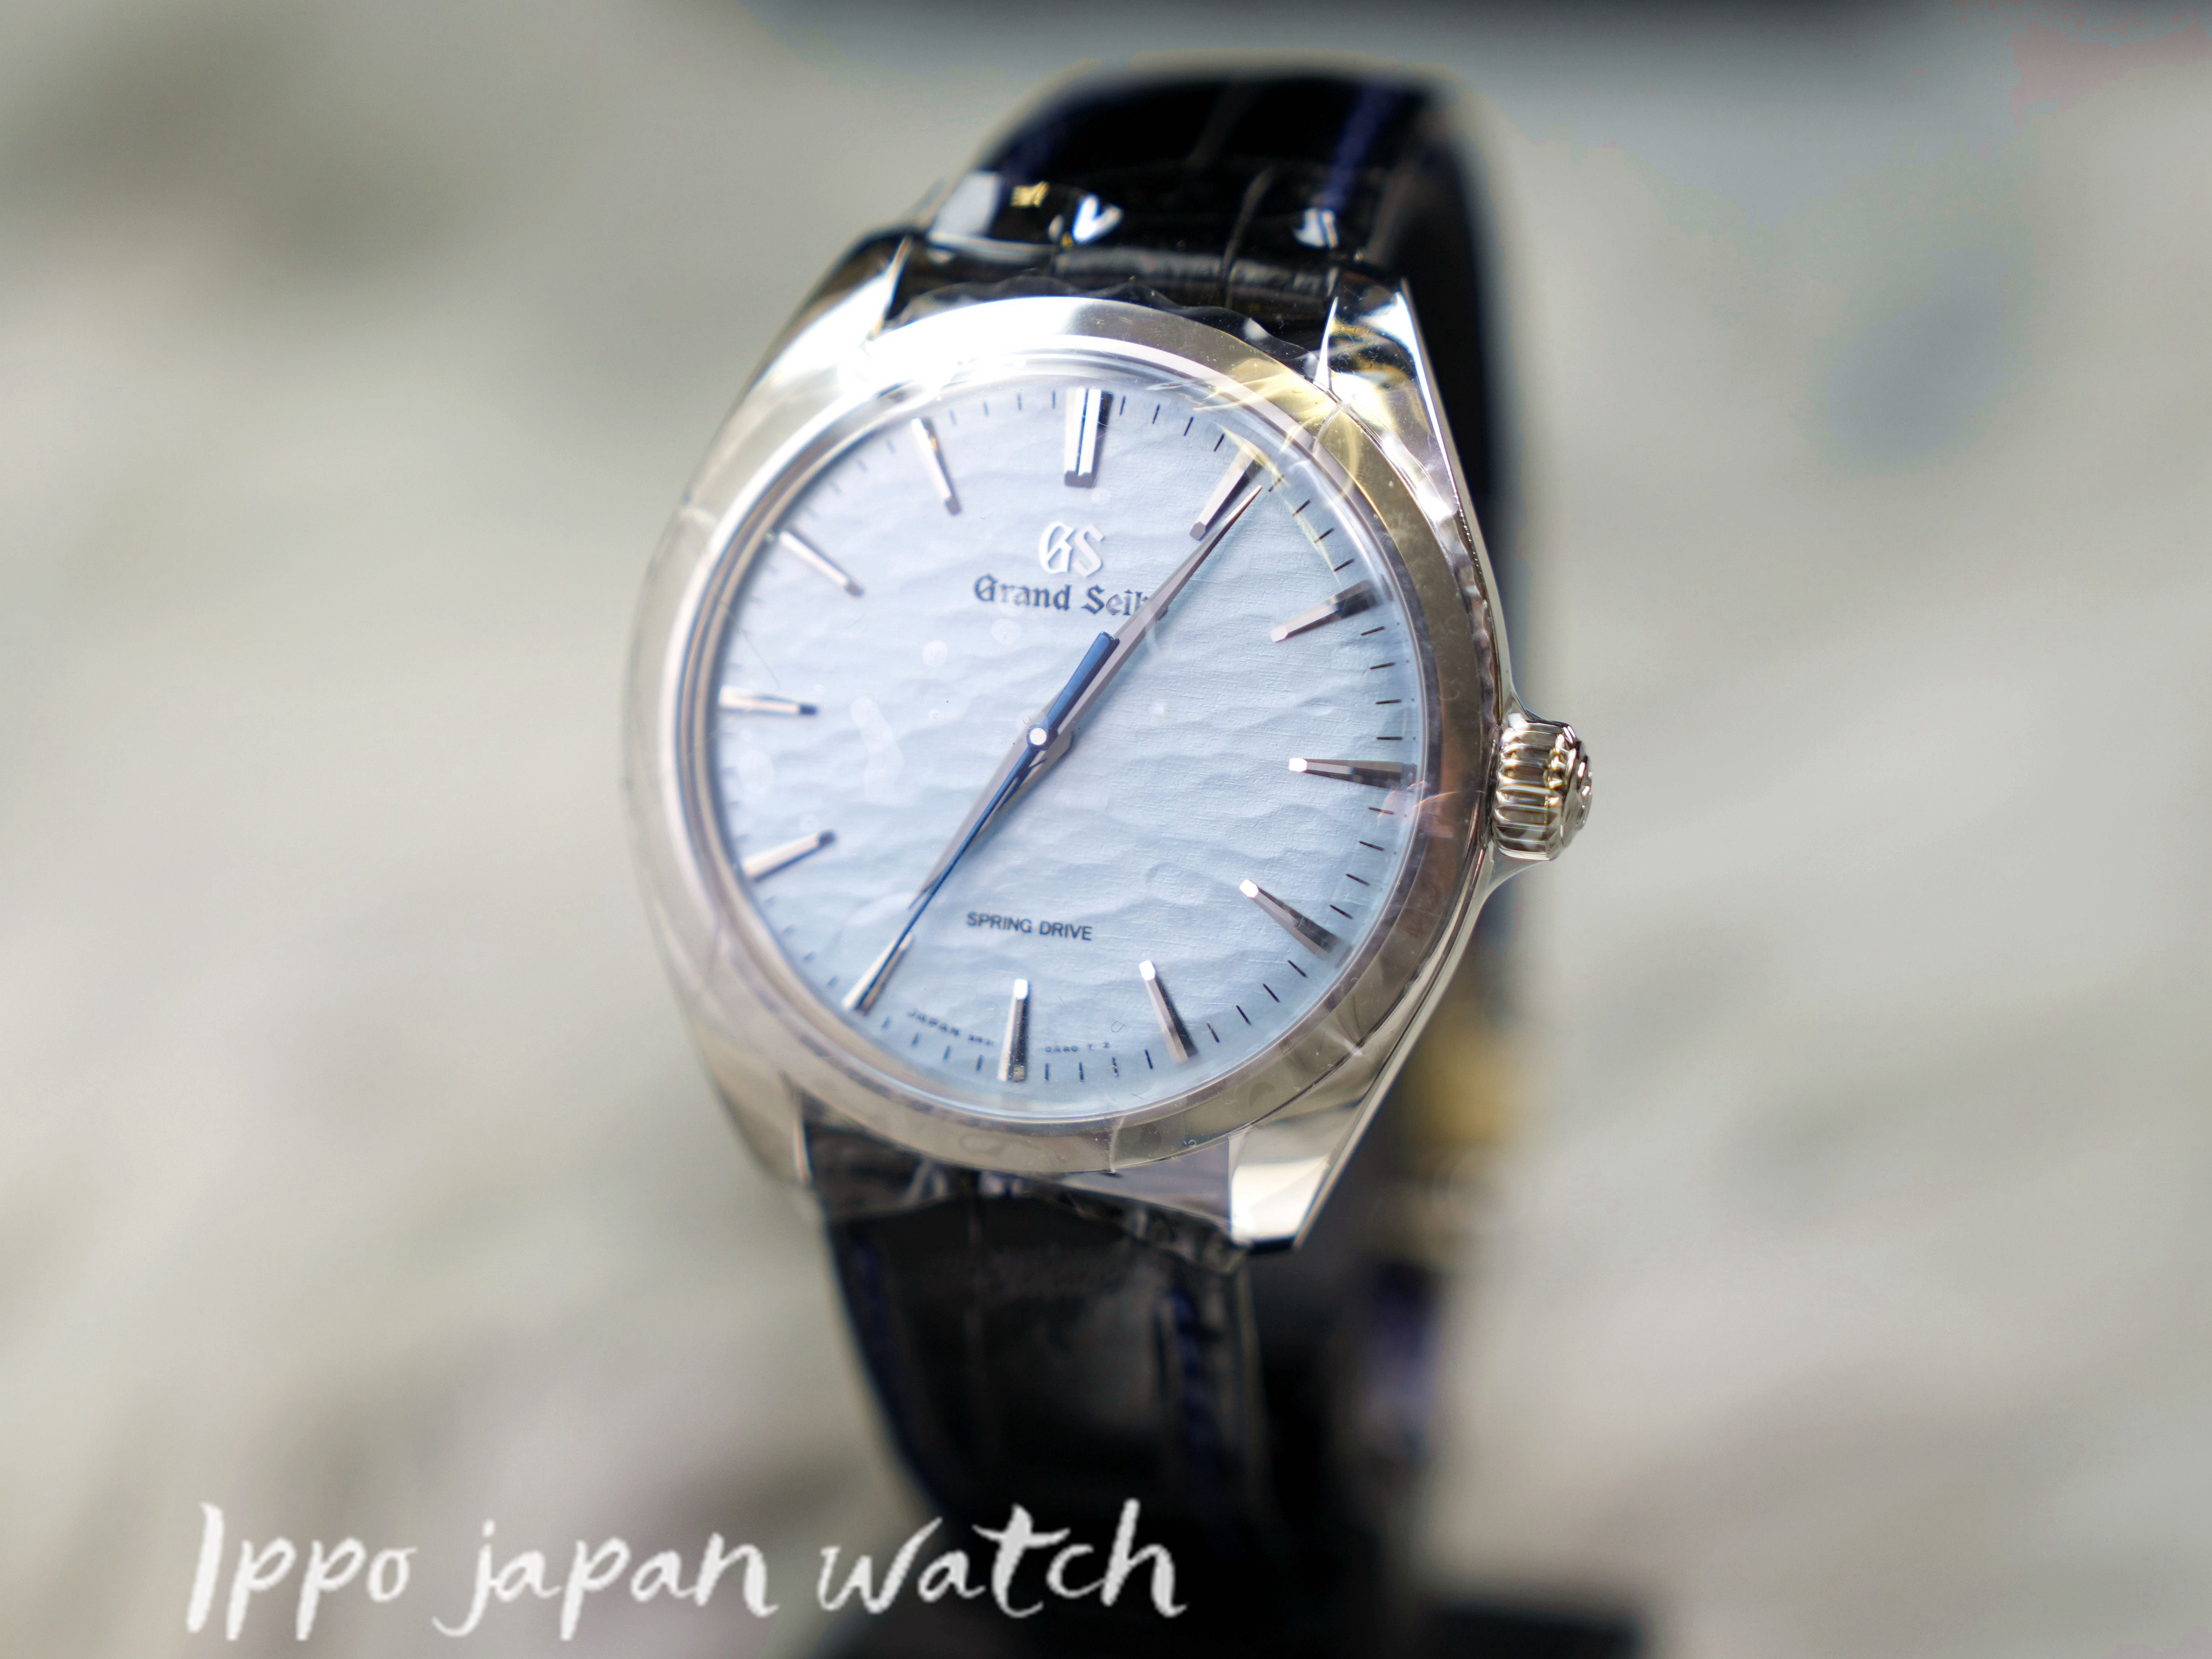 Grand Seiko Spring drive Hand-wind Stainless steel SBGY007 watch - IPPO JAPAN WATCH 